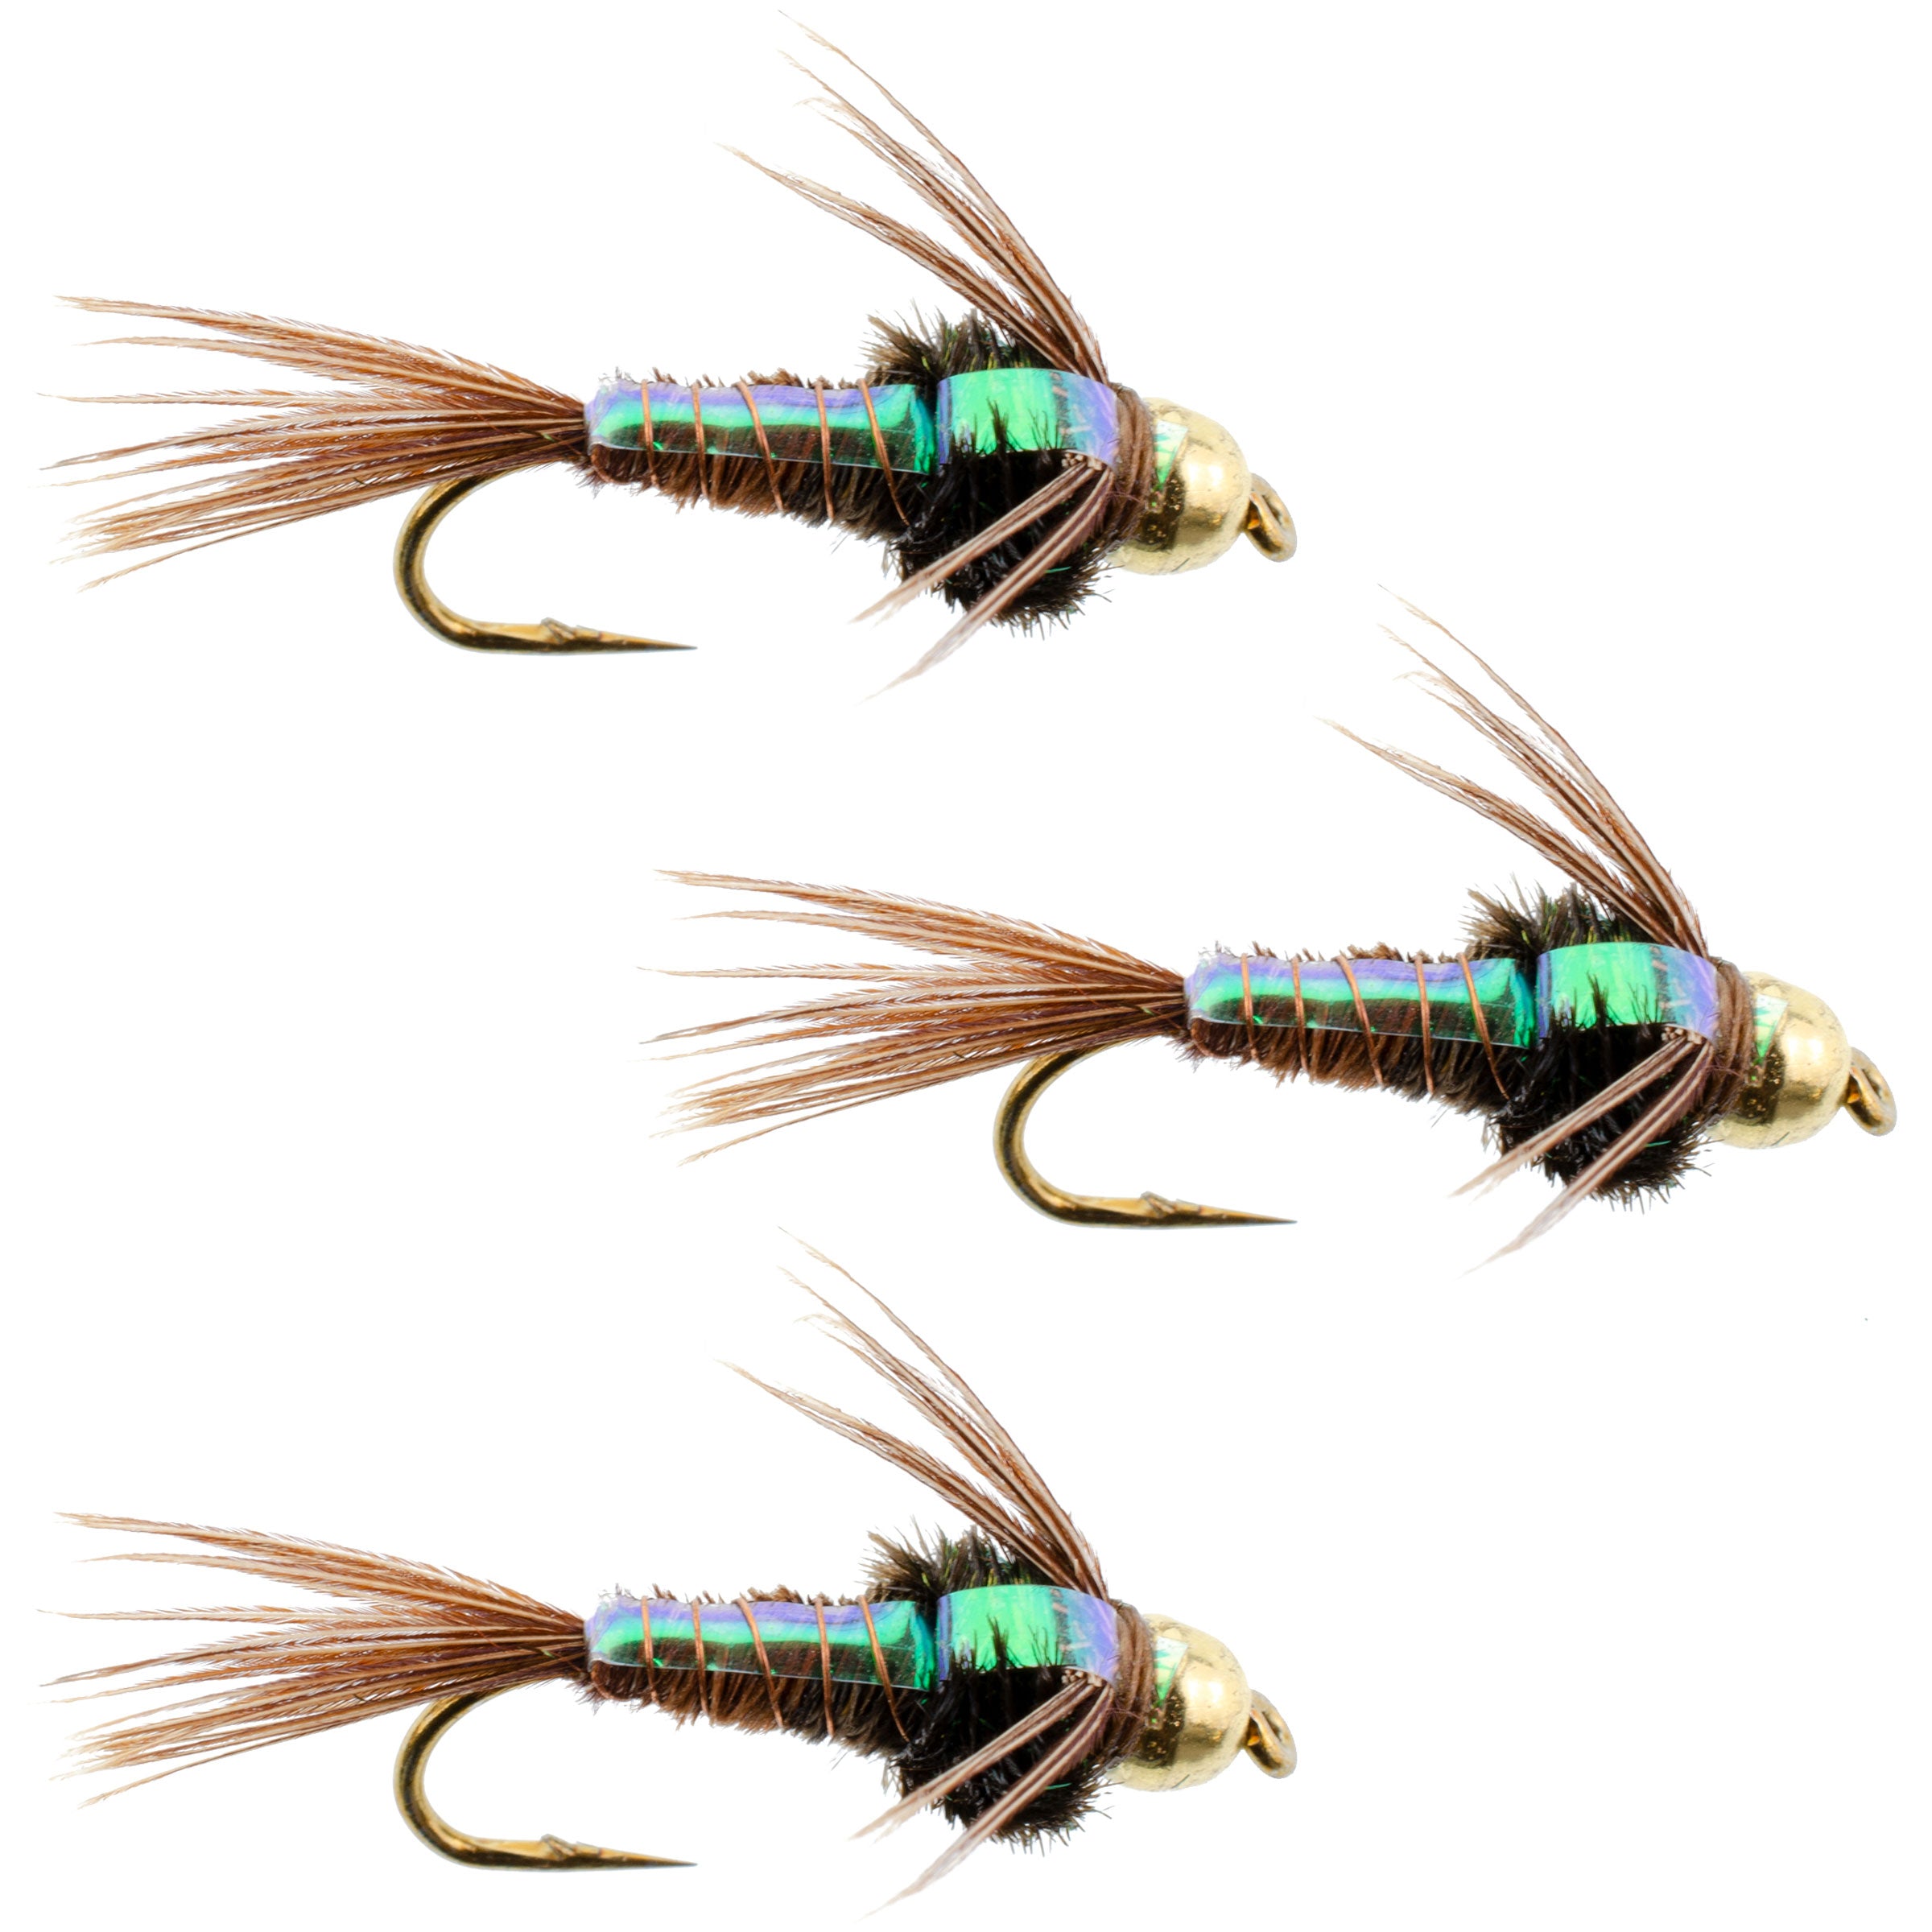 3 Pack Bead Head Flashback Pheasant Tail Nymph Fly Fishing Flies Hook Size 16